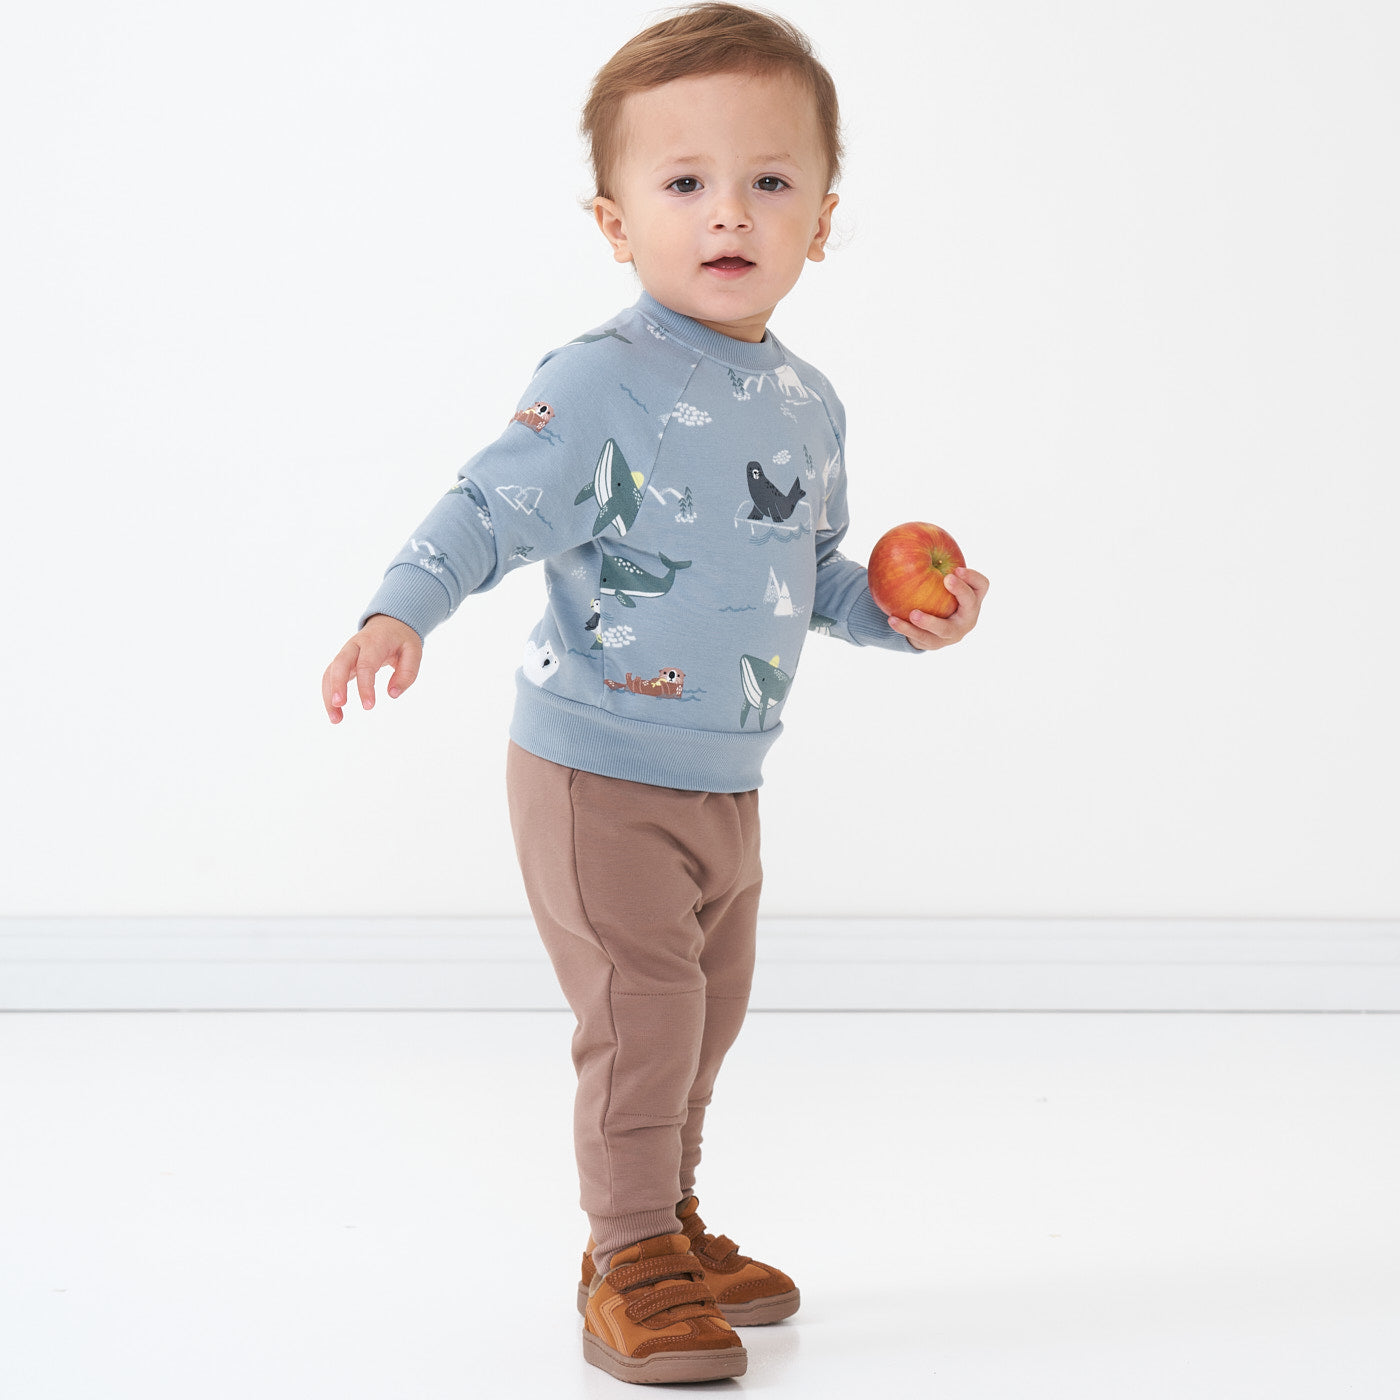 Child holding an apple wearing an Arctic Animals printed crewneck sweatshirt and coordinating joggers